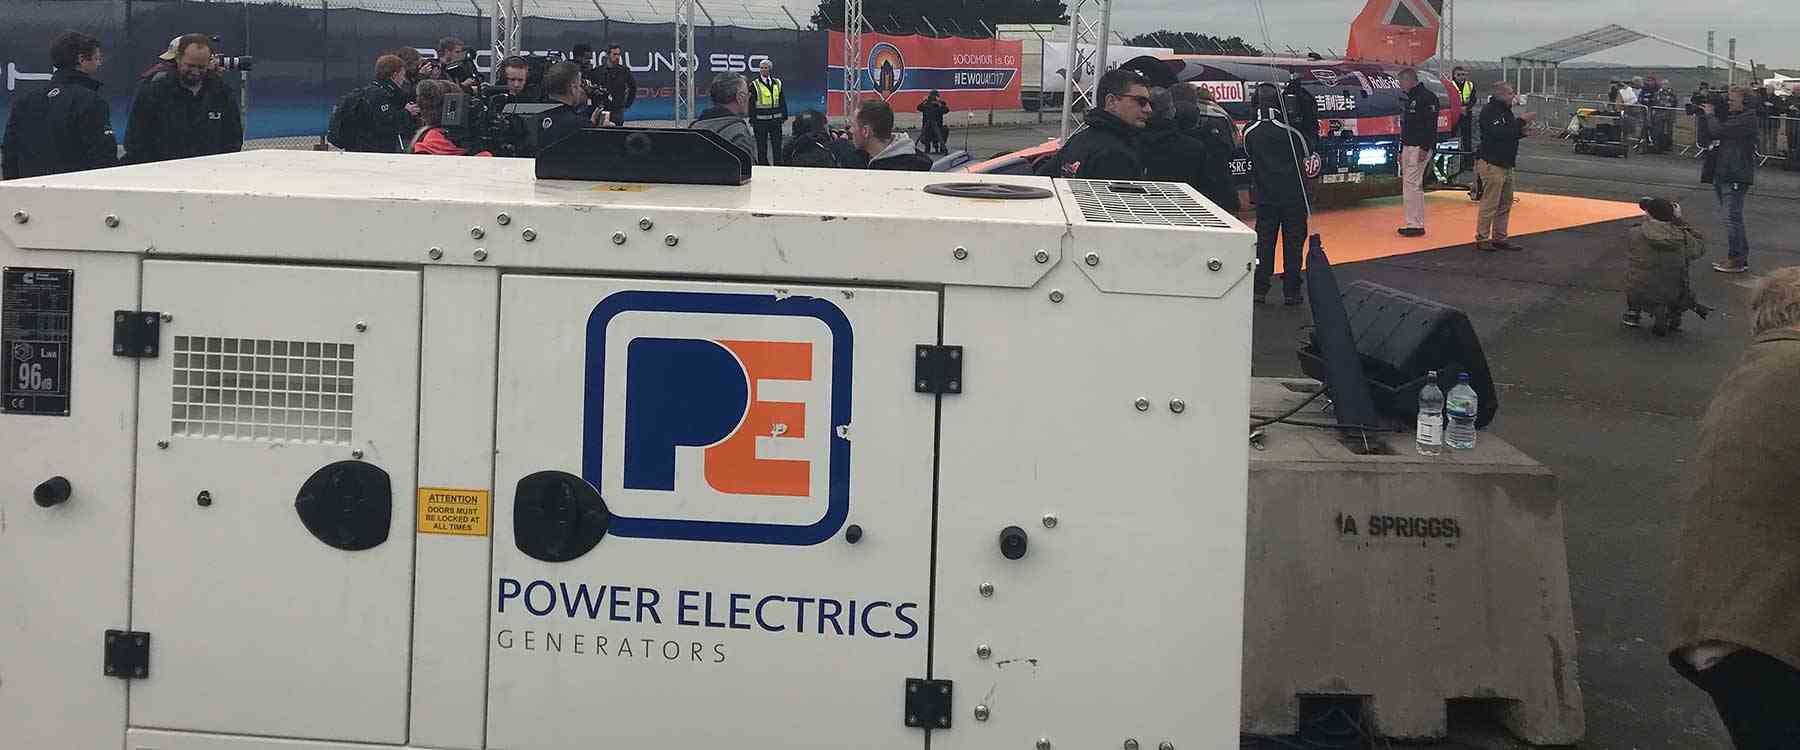 Power Electrics generator in front of the Bloodhound event)